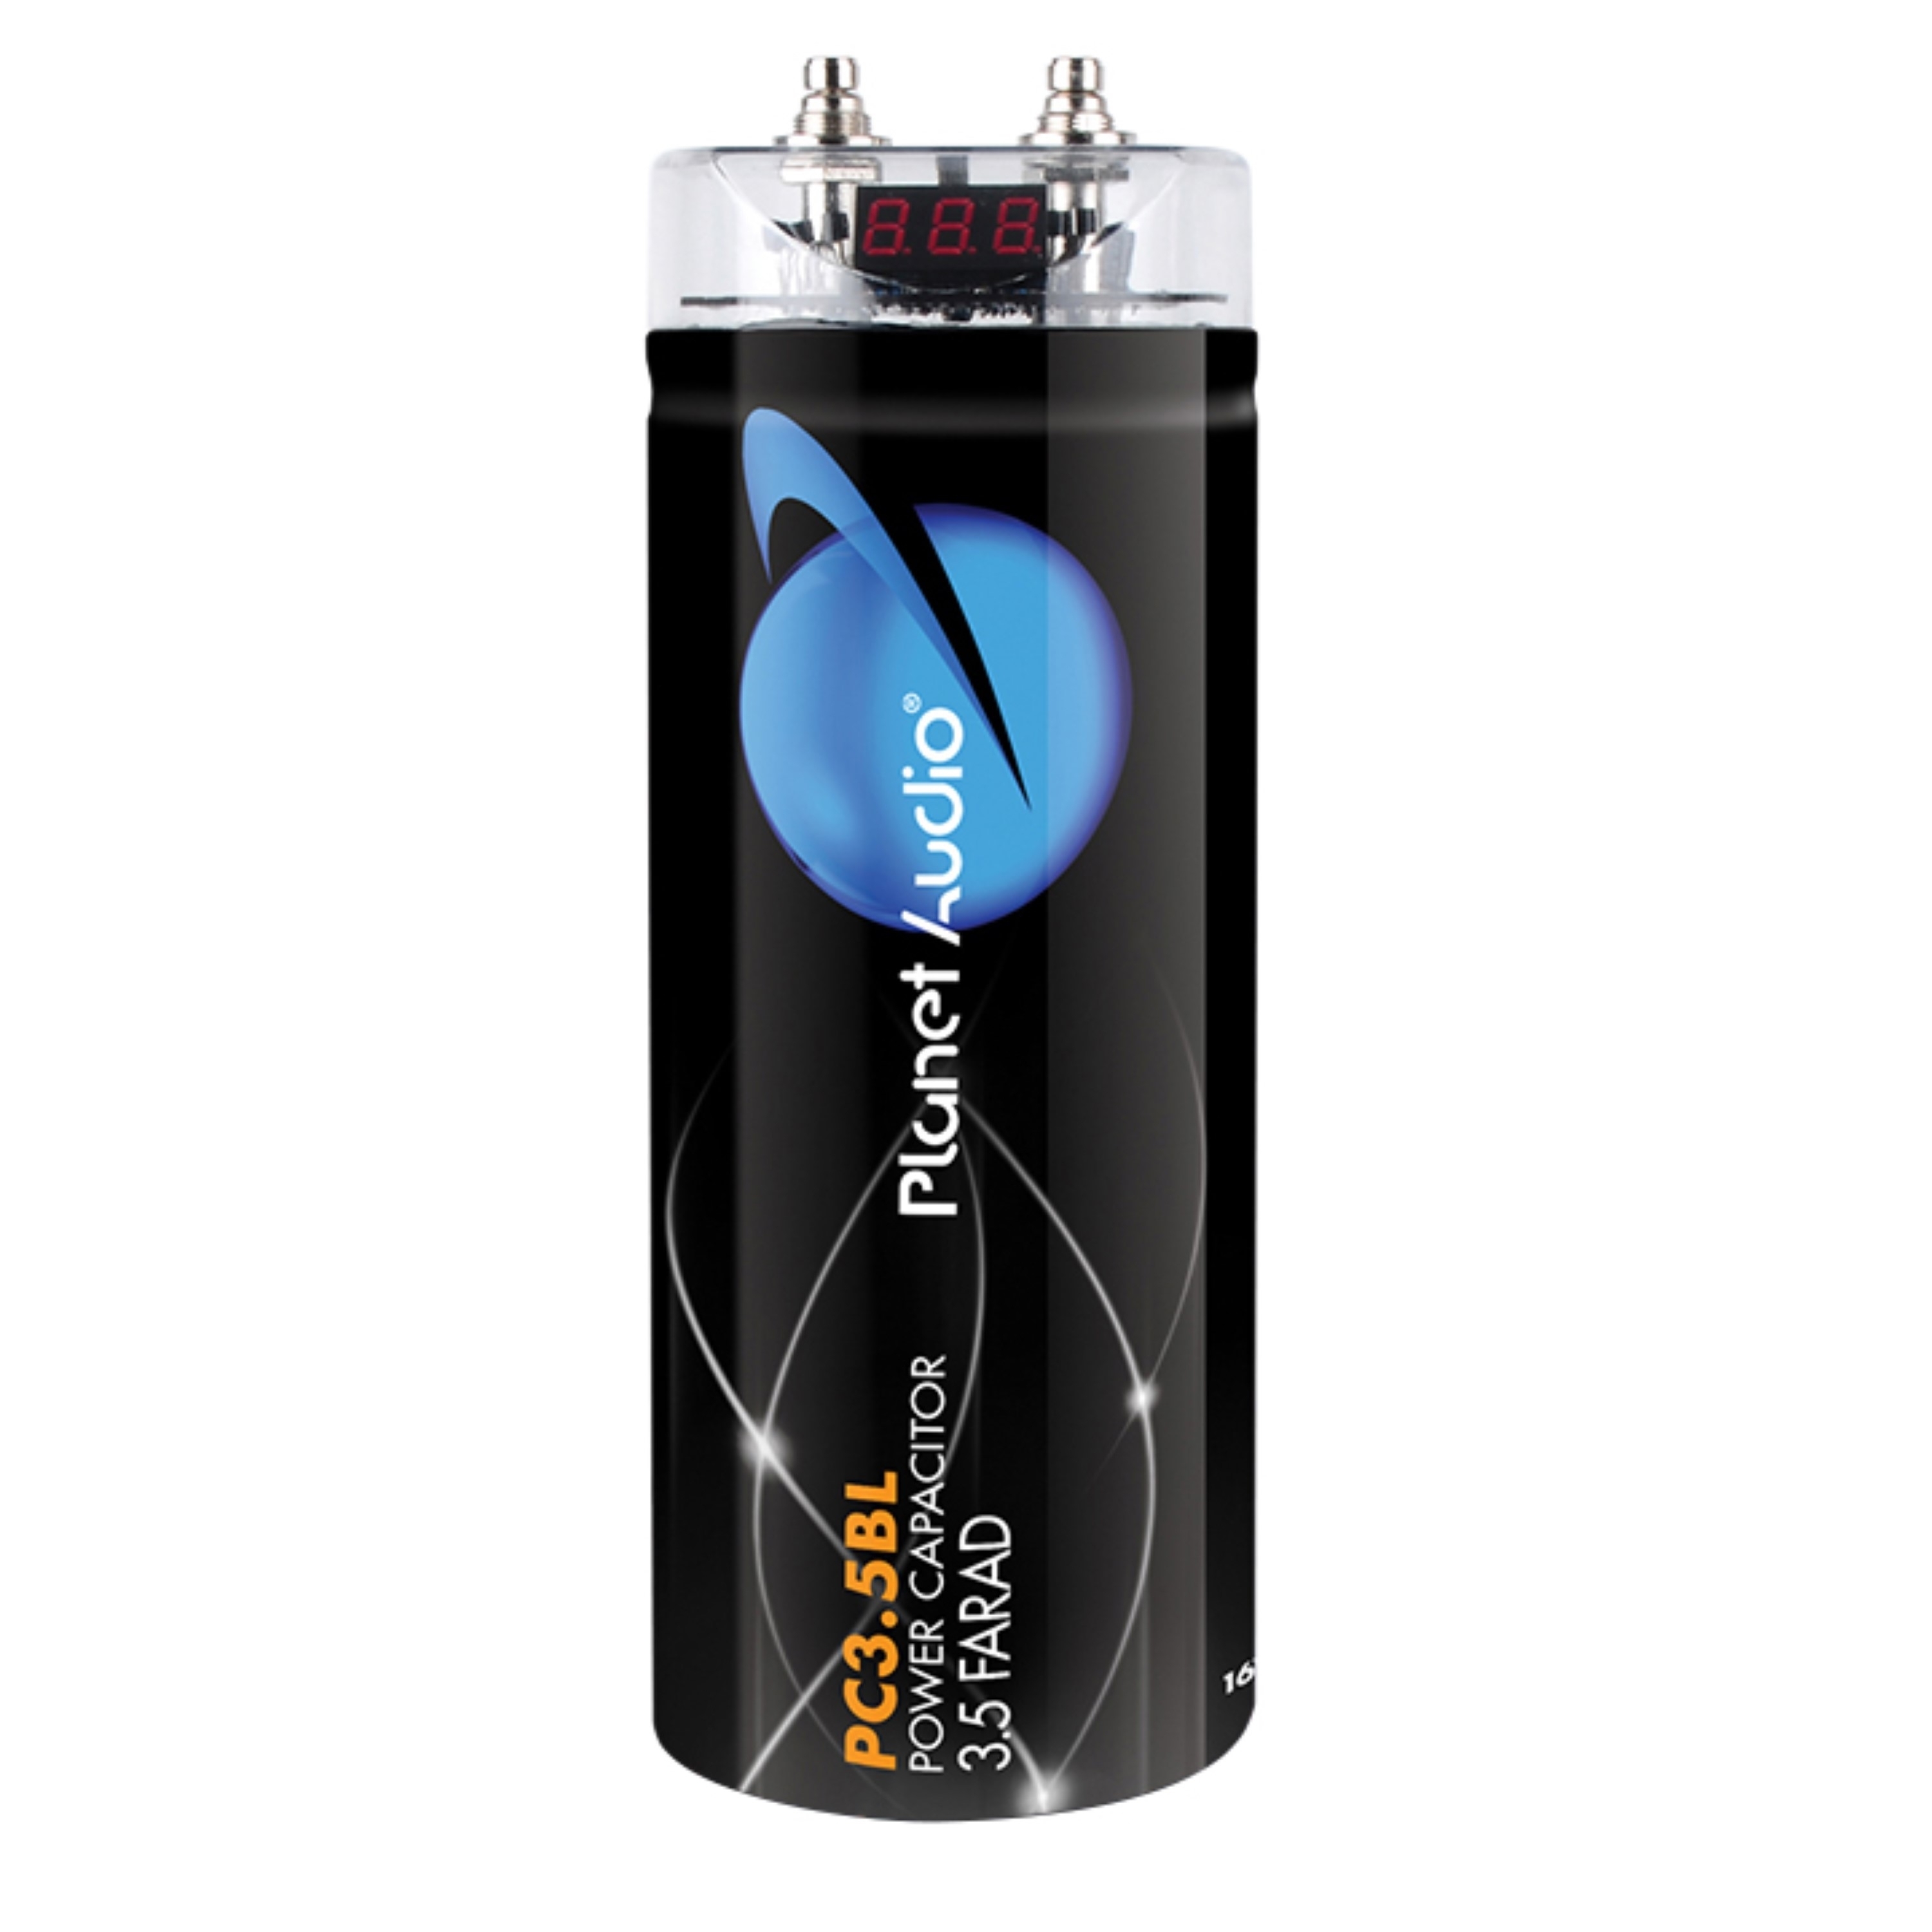 Planet Audio 3.5 Farad Car Capacitor For Energy Storage To Enhance Bass Demand From Audio System